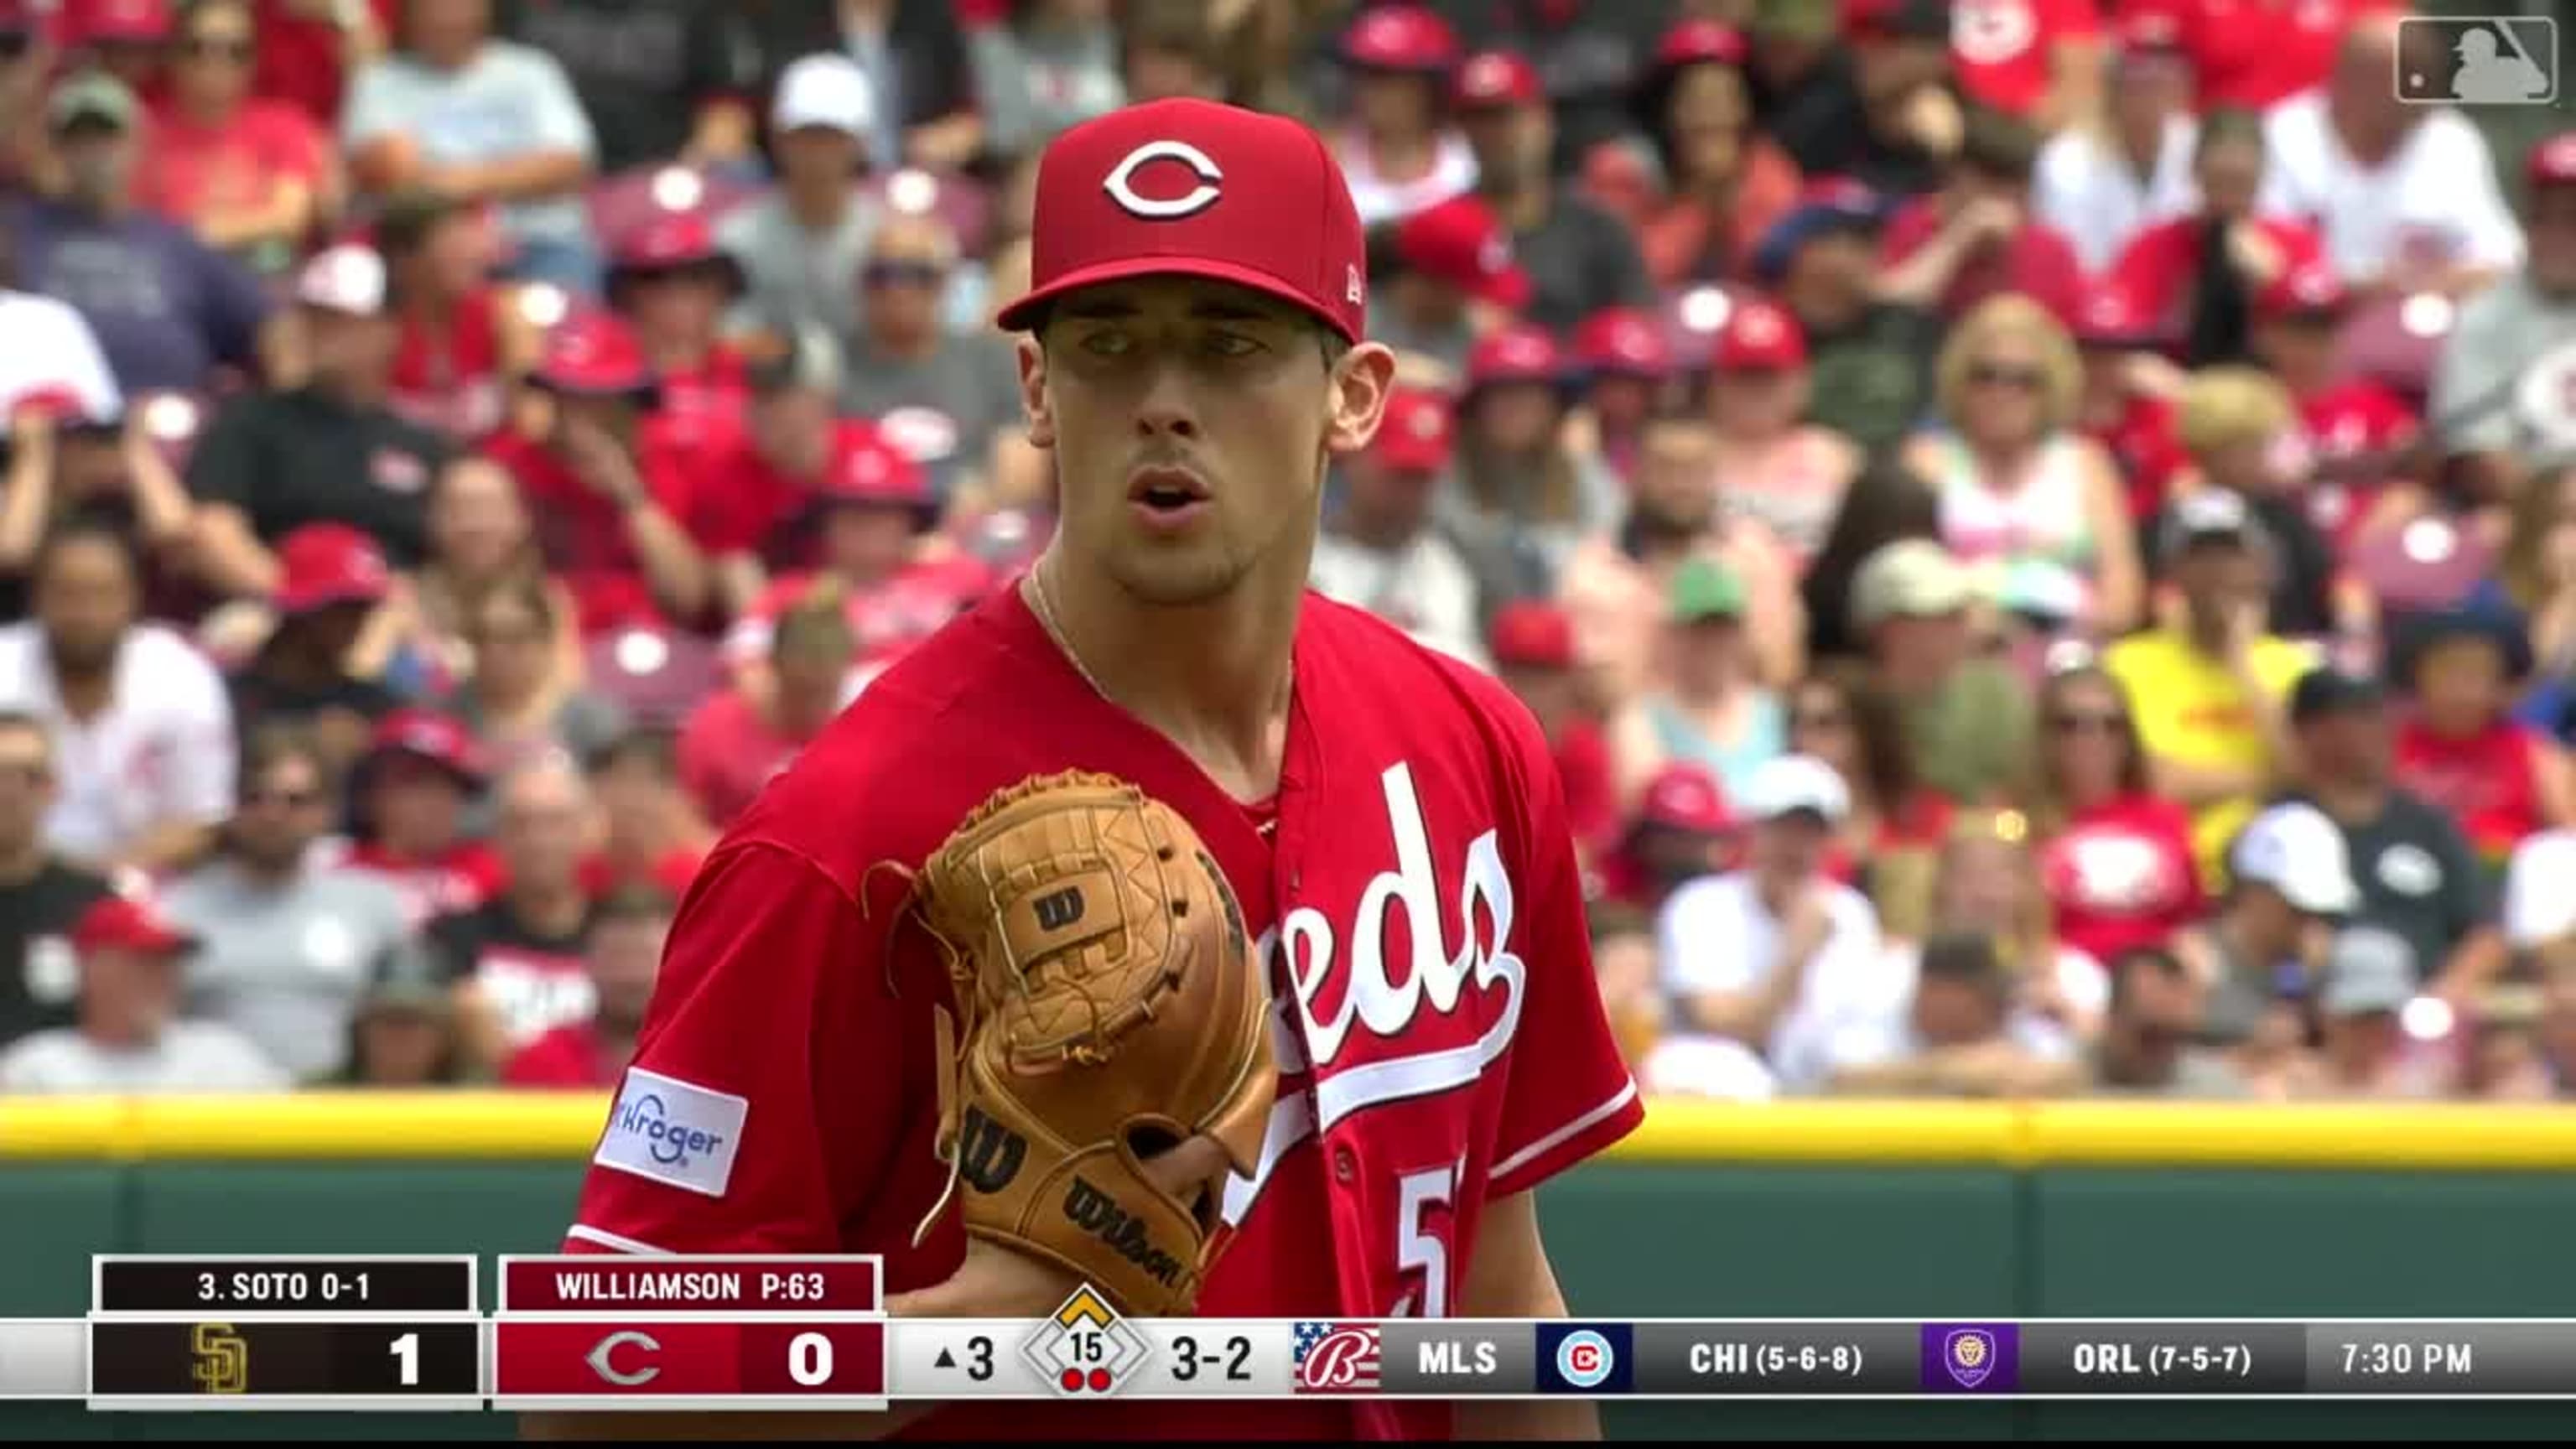 Reds hold off Royals, give Williamson first big-league win